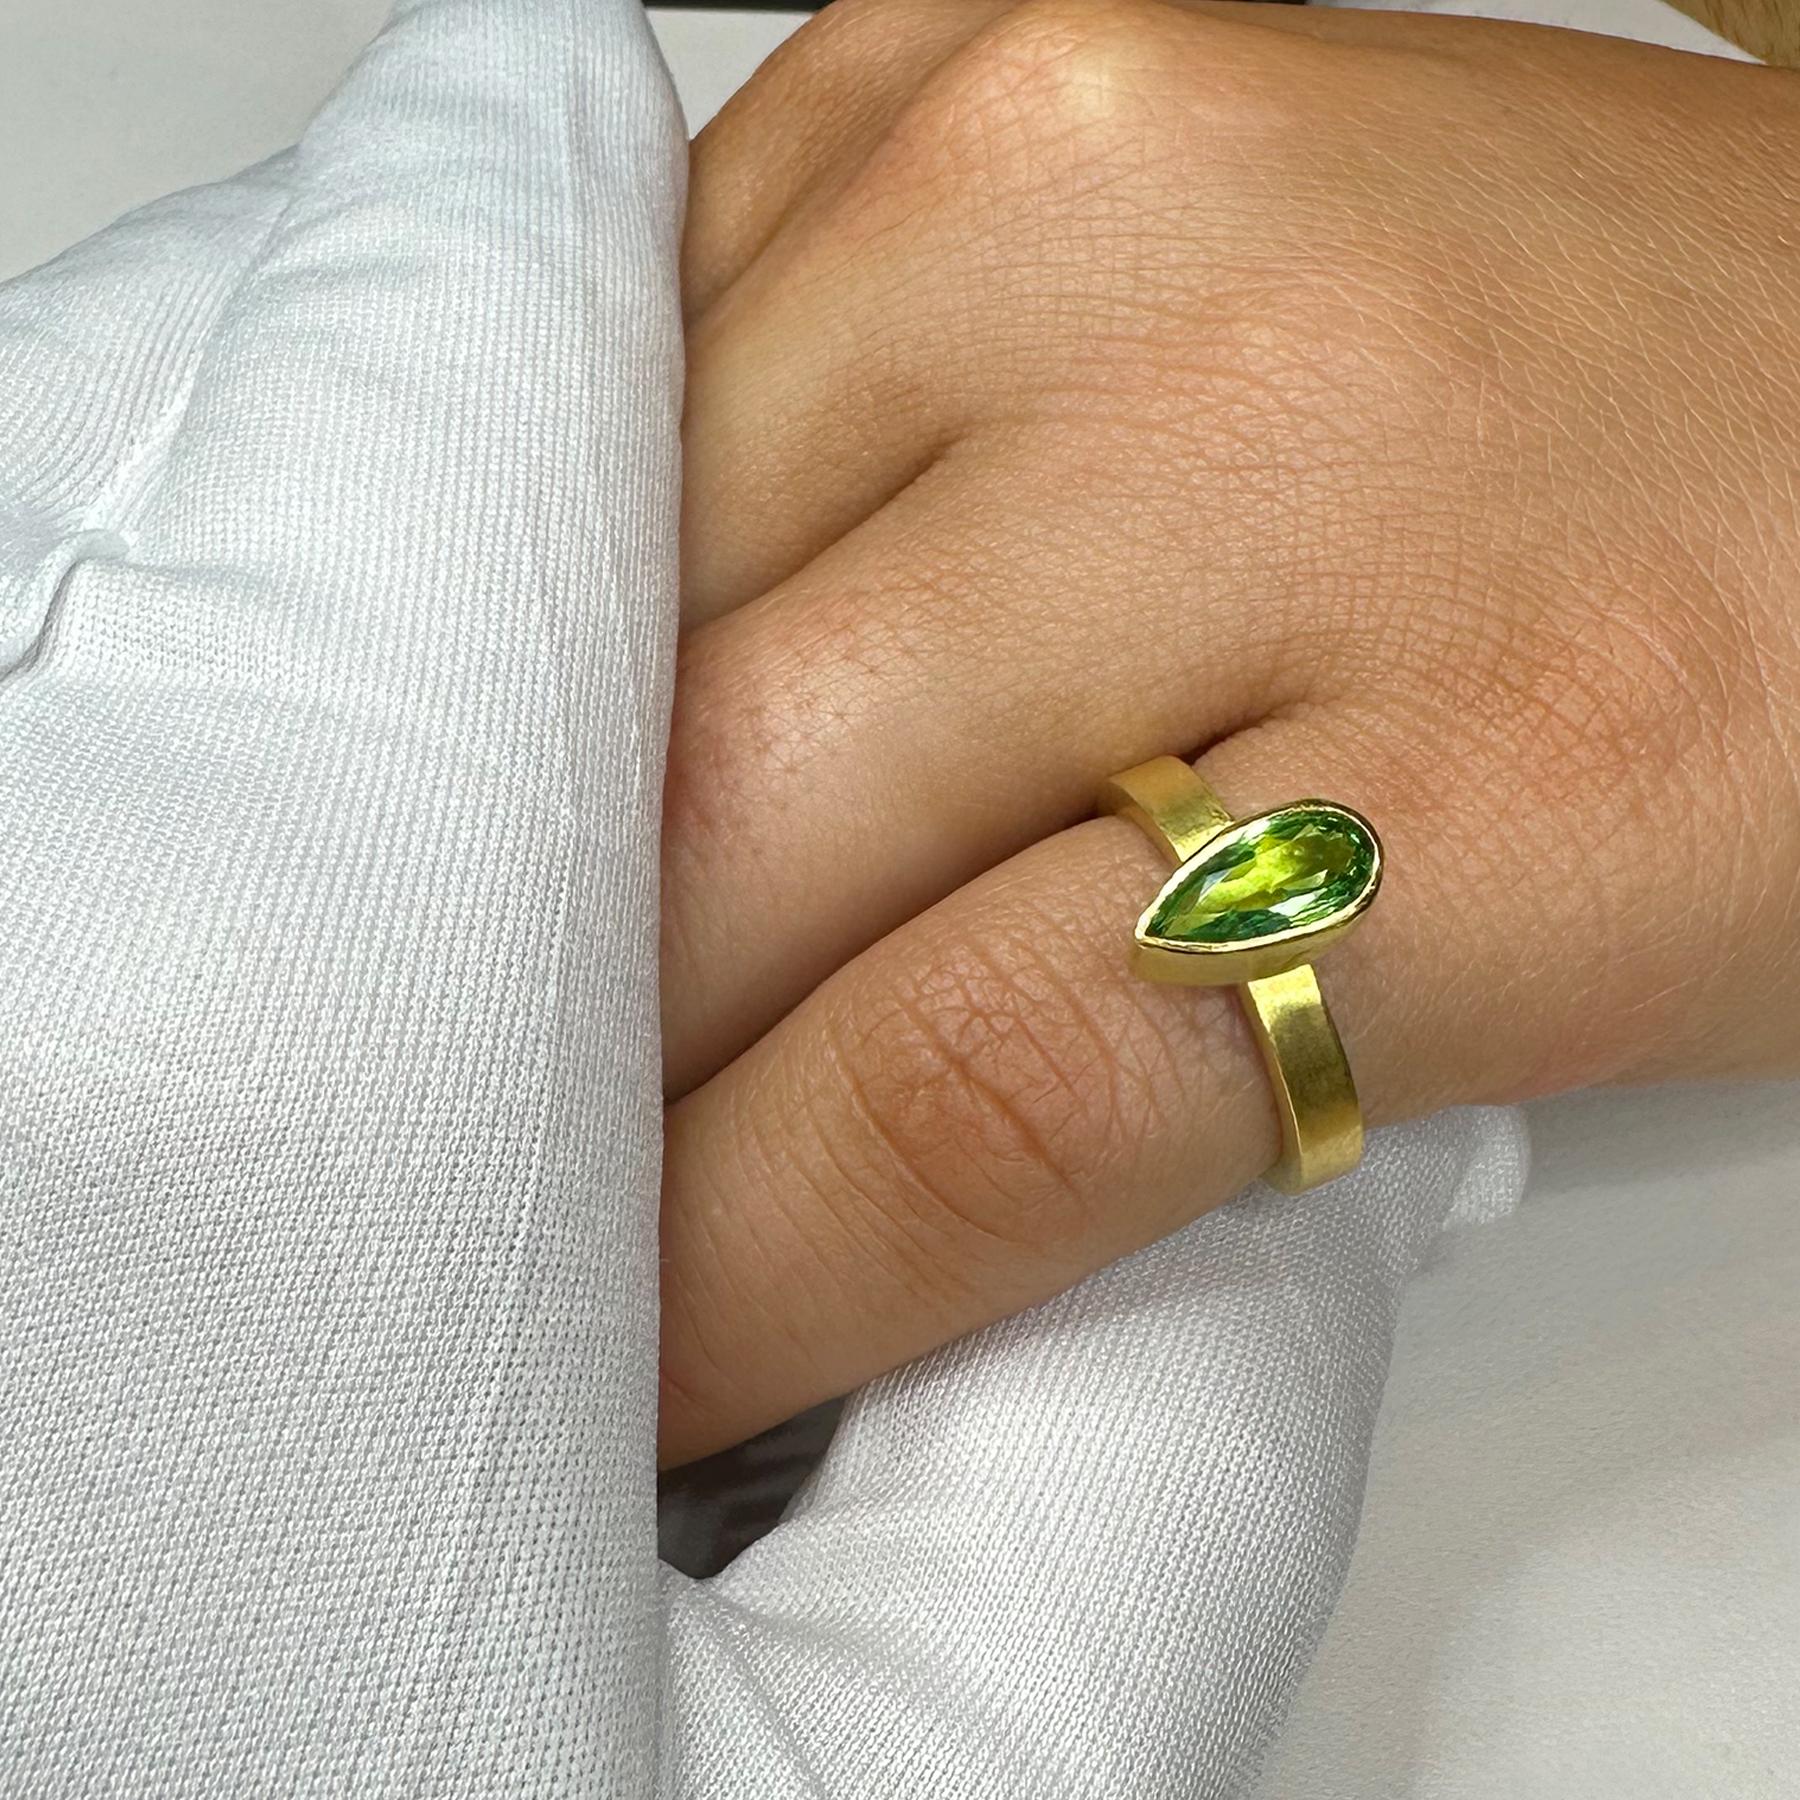 PHILIPPE SPENCER 1.02 Ct. Rare Tsavorite in 22K and 20K Gold Statement Ring In New Condition For Sale In Key West, FL